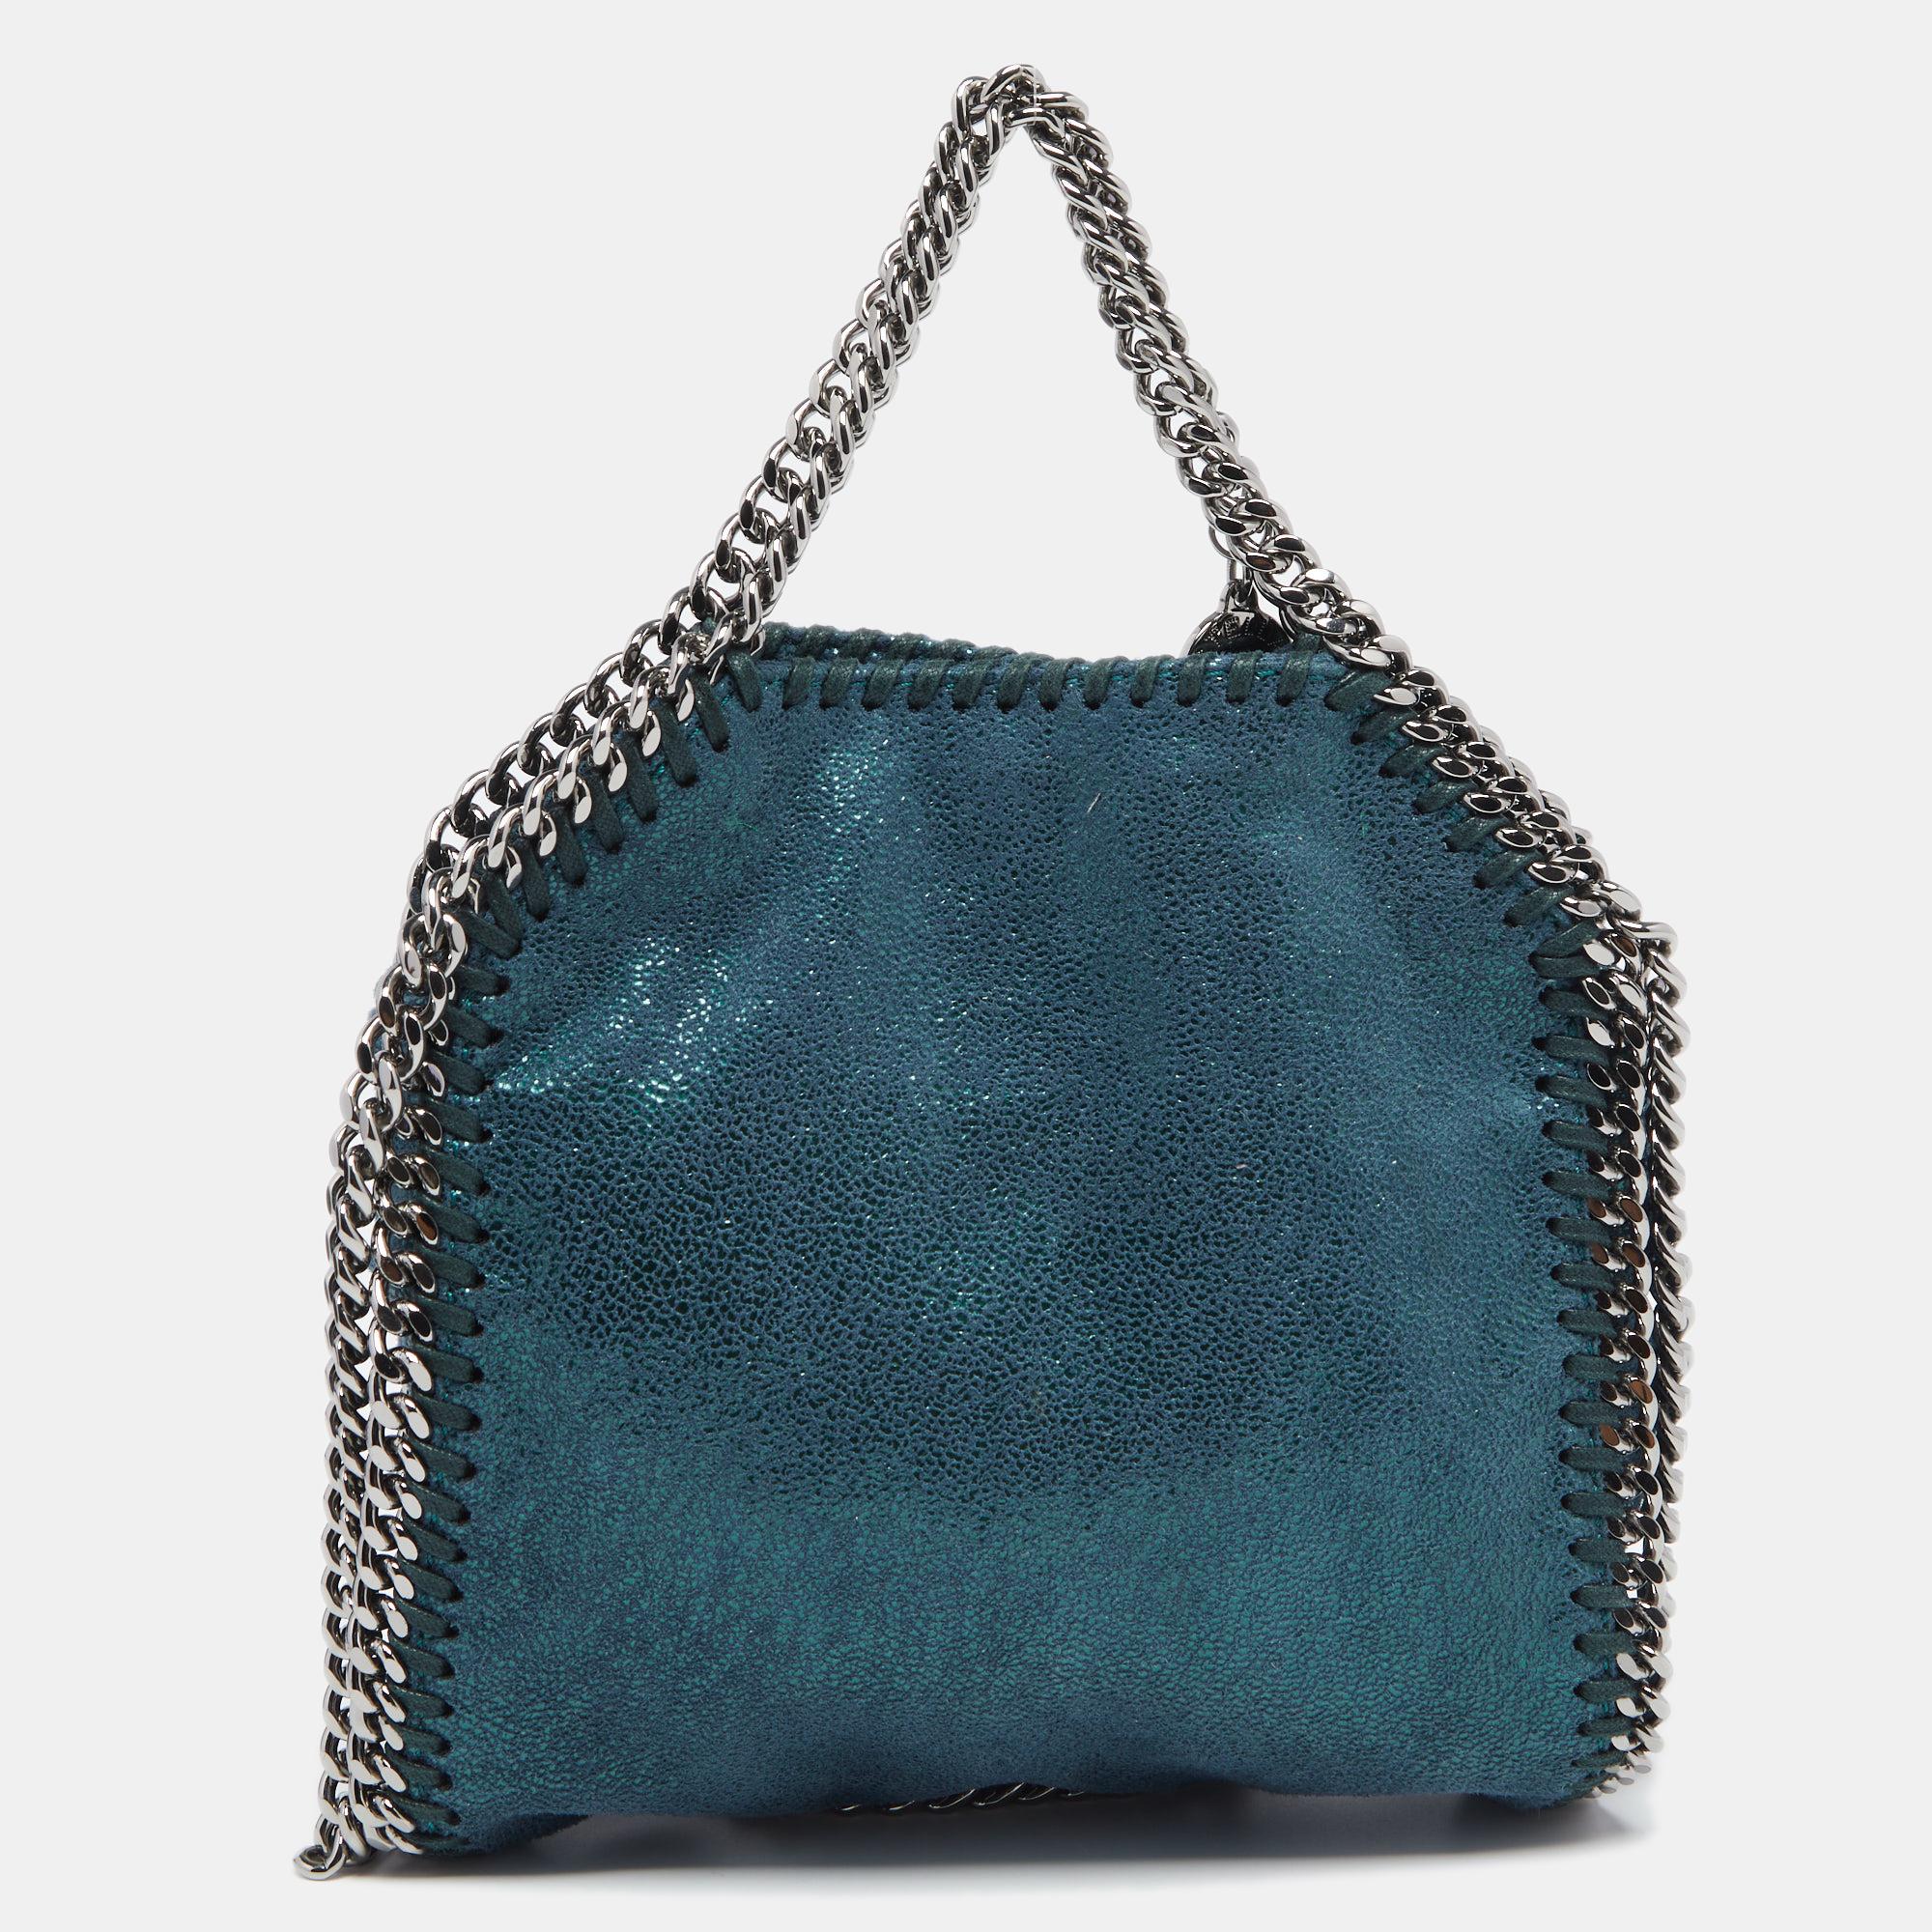 The chain whipstitch detailing beautifully outlines this Stella McCartney Falabella bag. Crafted from faux leather, it has been adorned with silver-tone accents, and it can be carried with a chain shoulder strap. The fabric-lined interior can safely